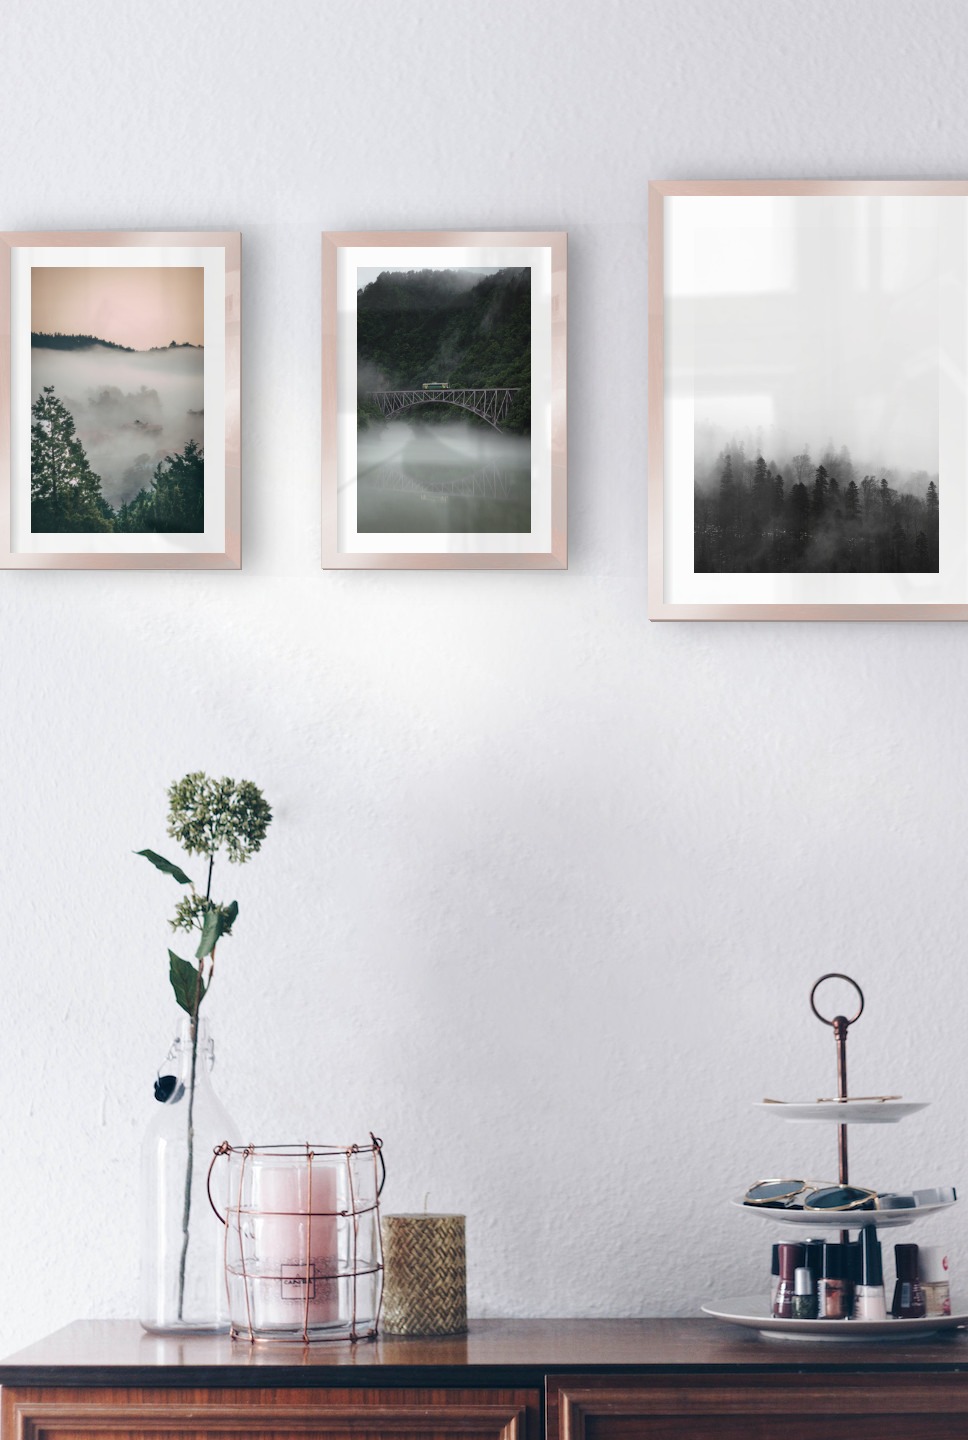 Gallery wall with picture frames in copper in sizes 21x30 and 30x40 with prints "Wooden tops and orange sky", "Train over bridge" and "Foggy wooden tops"